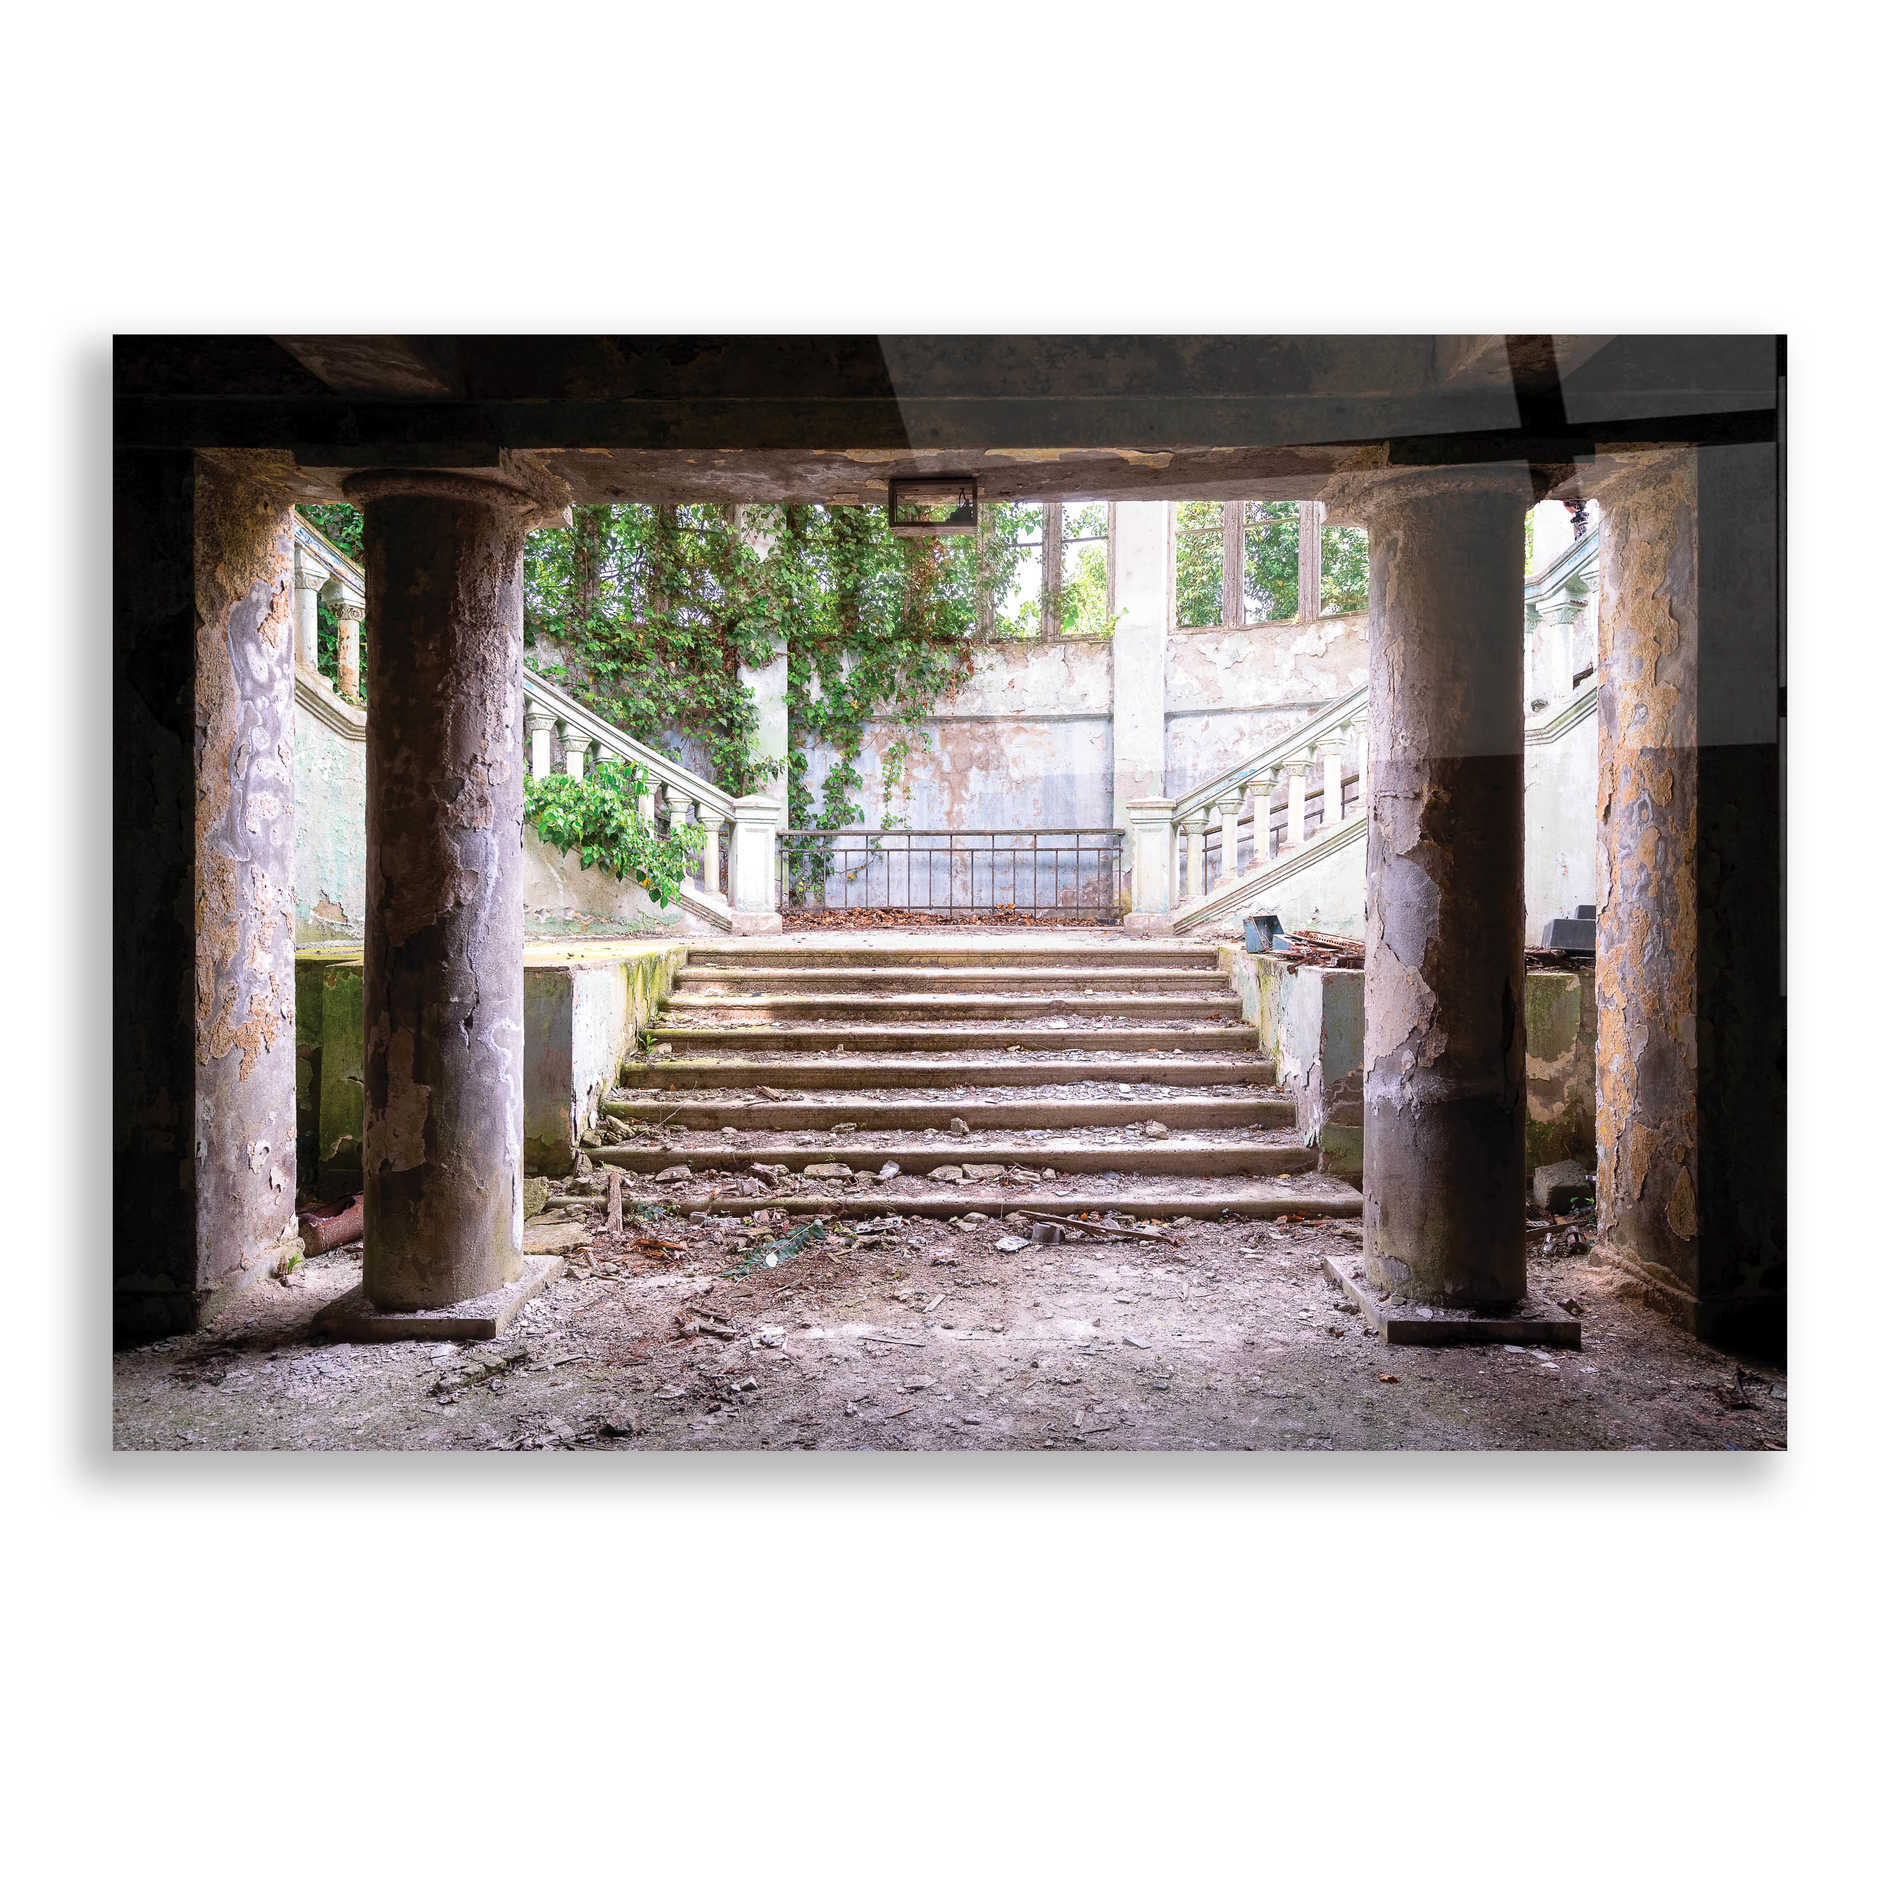 Epic Art 'Overgrown Stairs' by Roman Robroek, Acrylic Glass Wall Art,24x16